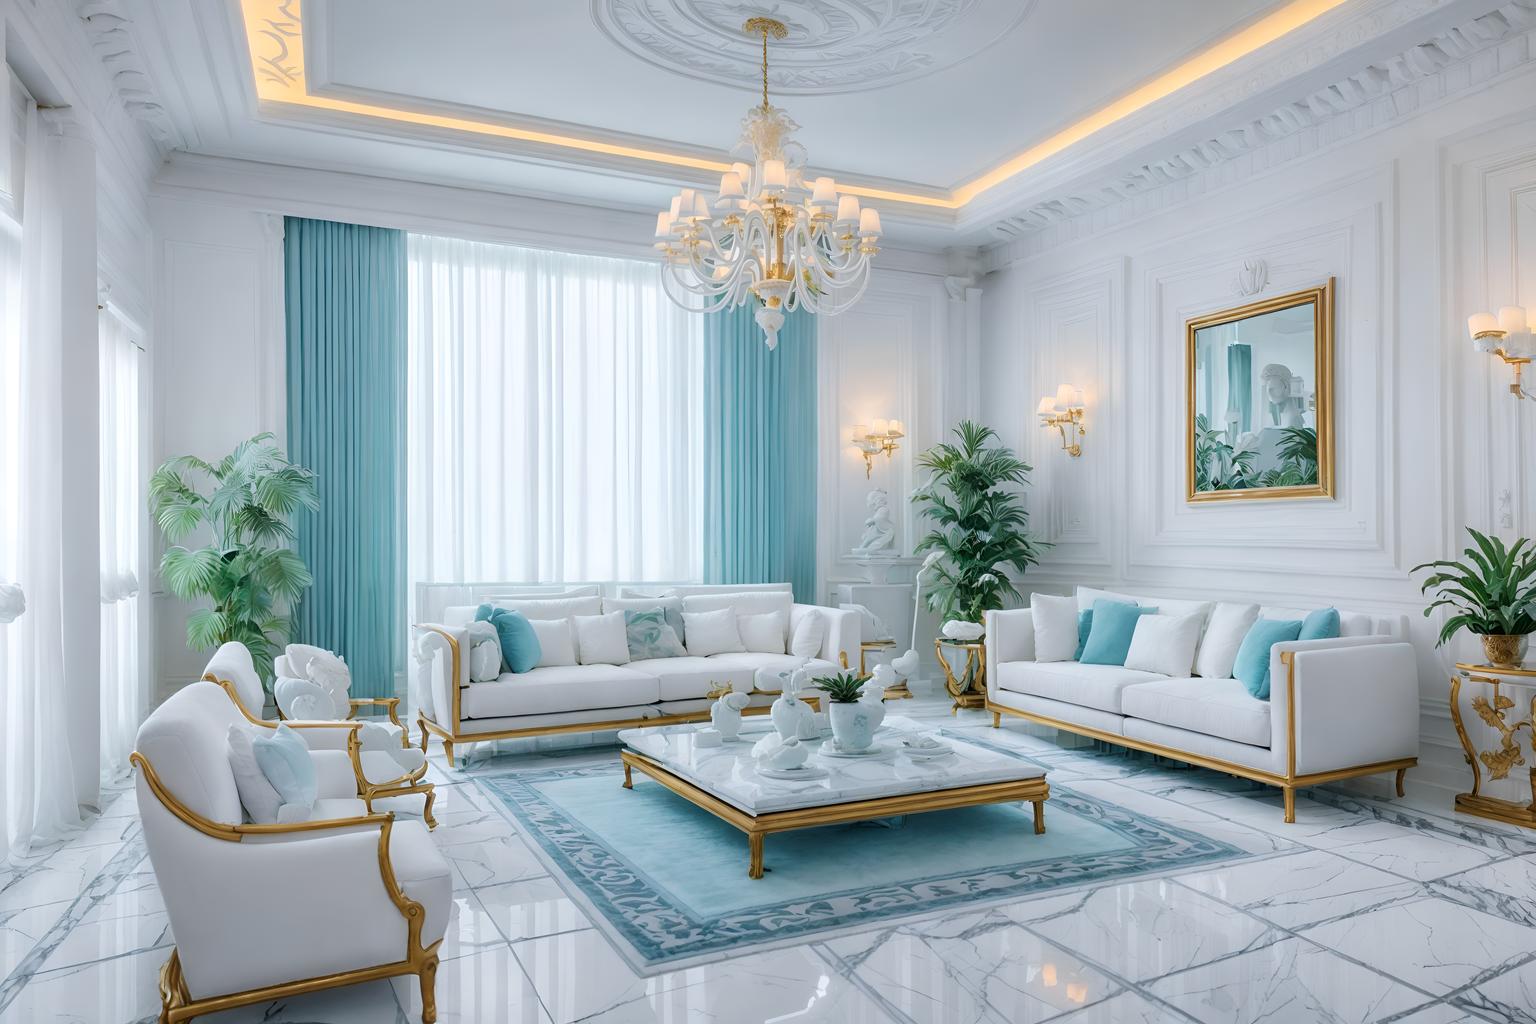 Vaporwave-style (living room interior) With coffee tables and sofa and televisions and plant and rug and chairs and furniture and electric lamps. . With baby blue and white square bathroom tiles and palm trees and white square bathroom tiles and white Roman statues, white Roman sculptures, white Roman columns, white Roman pillars in the center of the room, and white square bathroom tiles and white Roman statues, white Roman sculptures, white Roman columns, white Roman pillars in the center of the room, and japanese letters on wall. . Cinematic photo, highly detailed, cinematic lighting, ultra-detailed, ultrarealistic, photorealism, 8k. Vaporwave interior design style